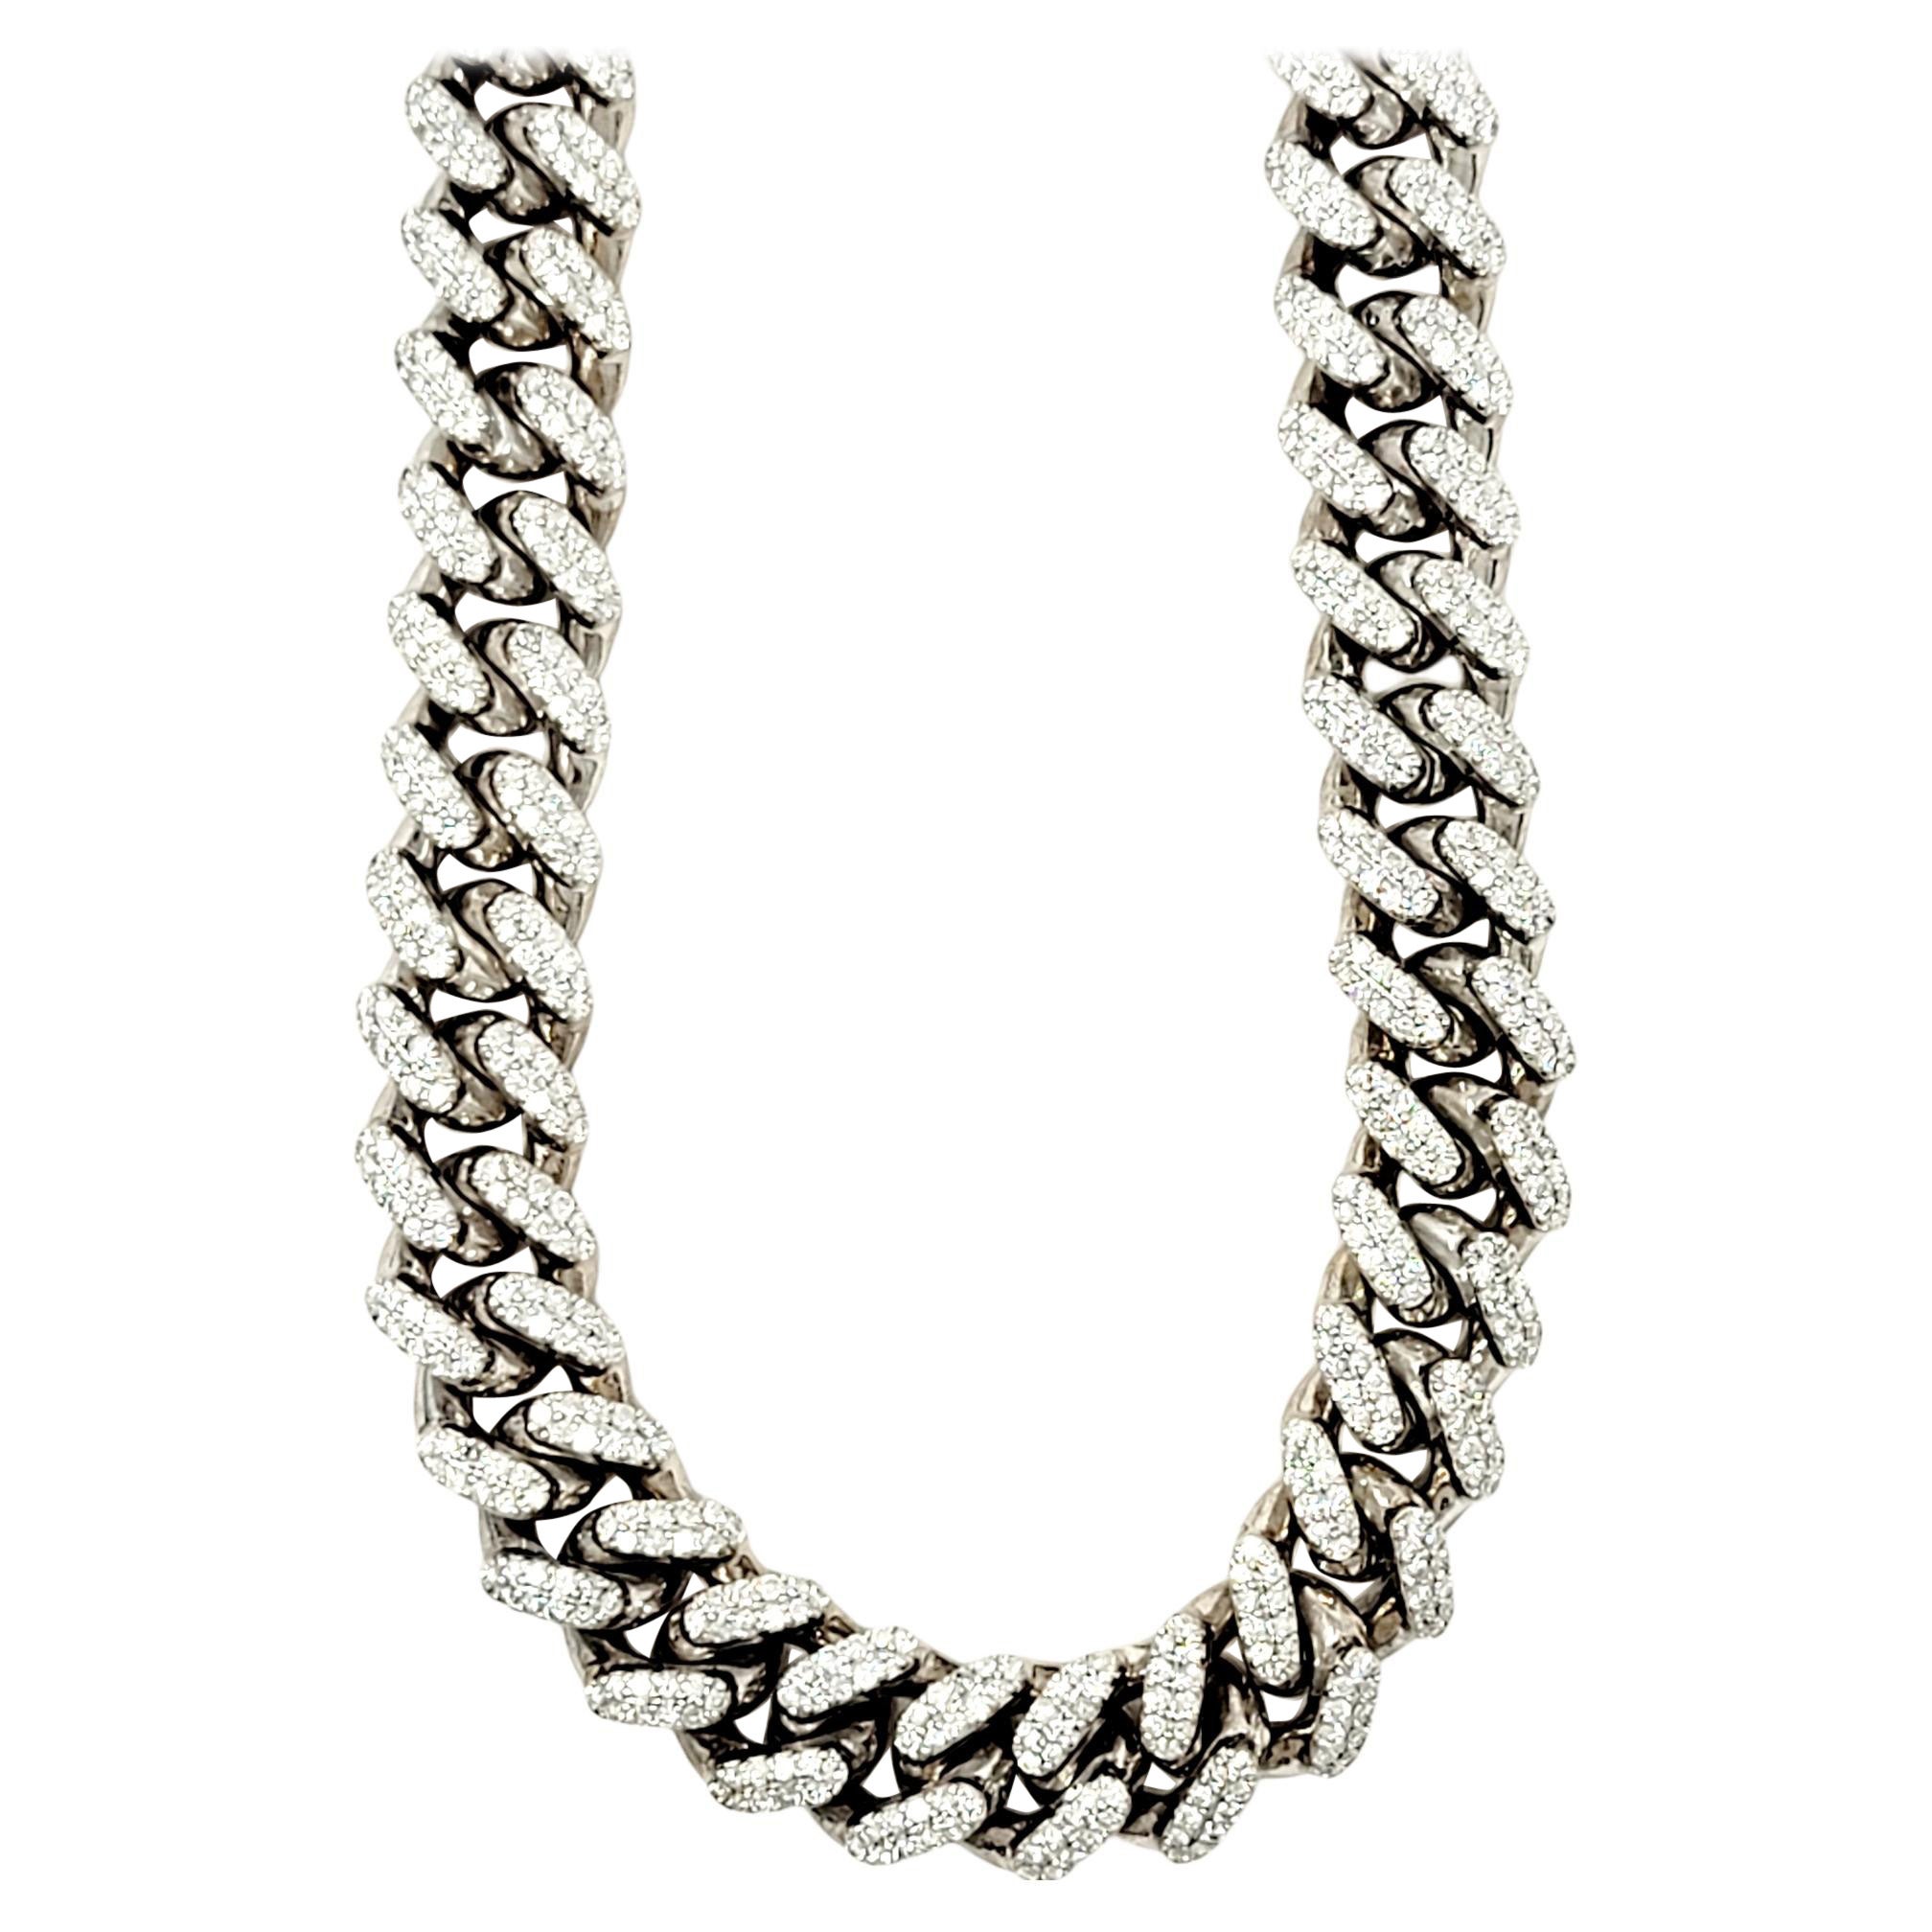 Diamond and White Gold Cuban Link Necklace 22.80 Carats in 14 Karat Gold